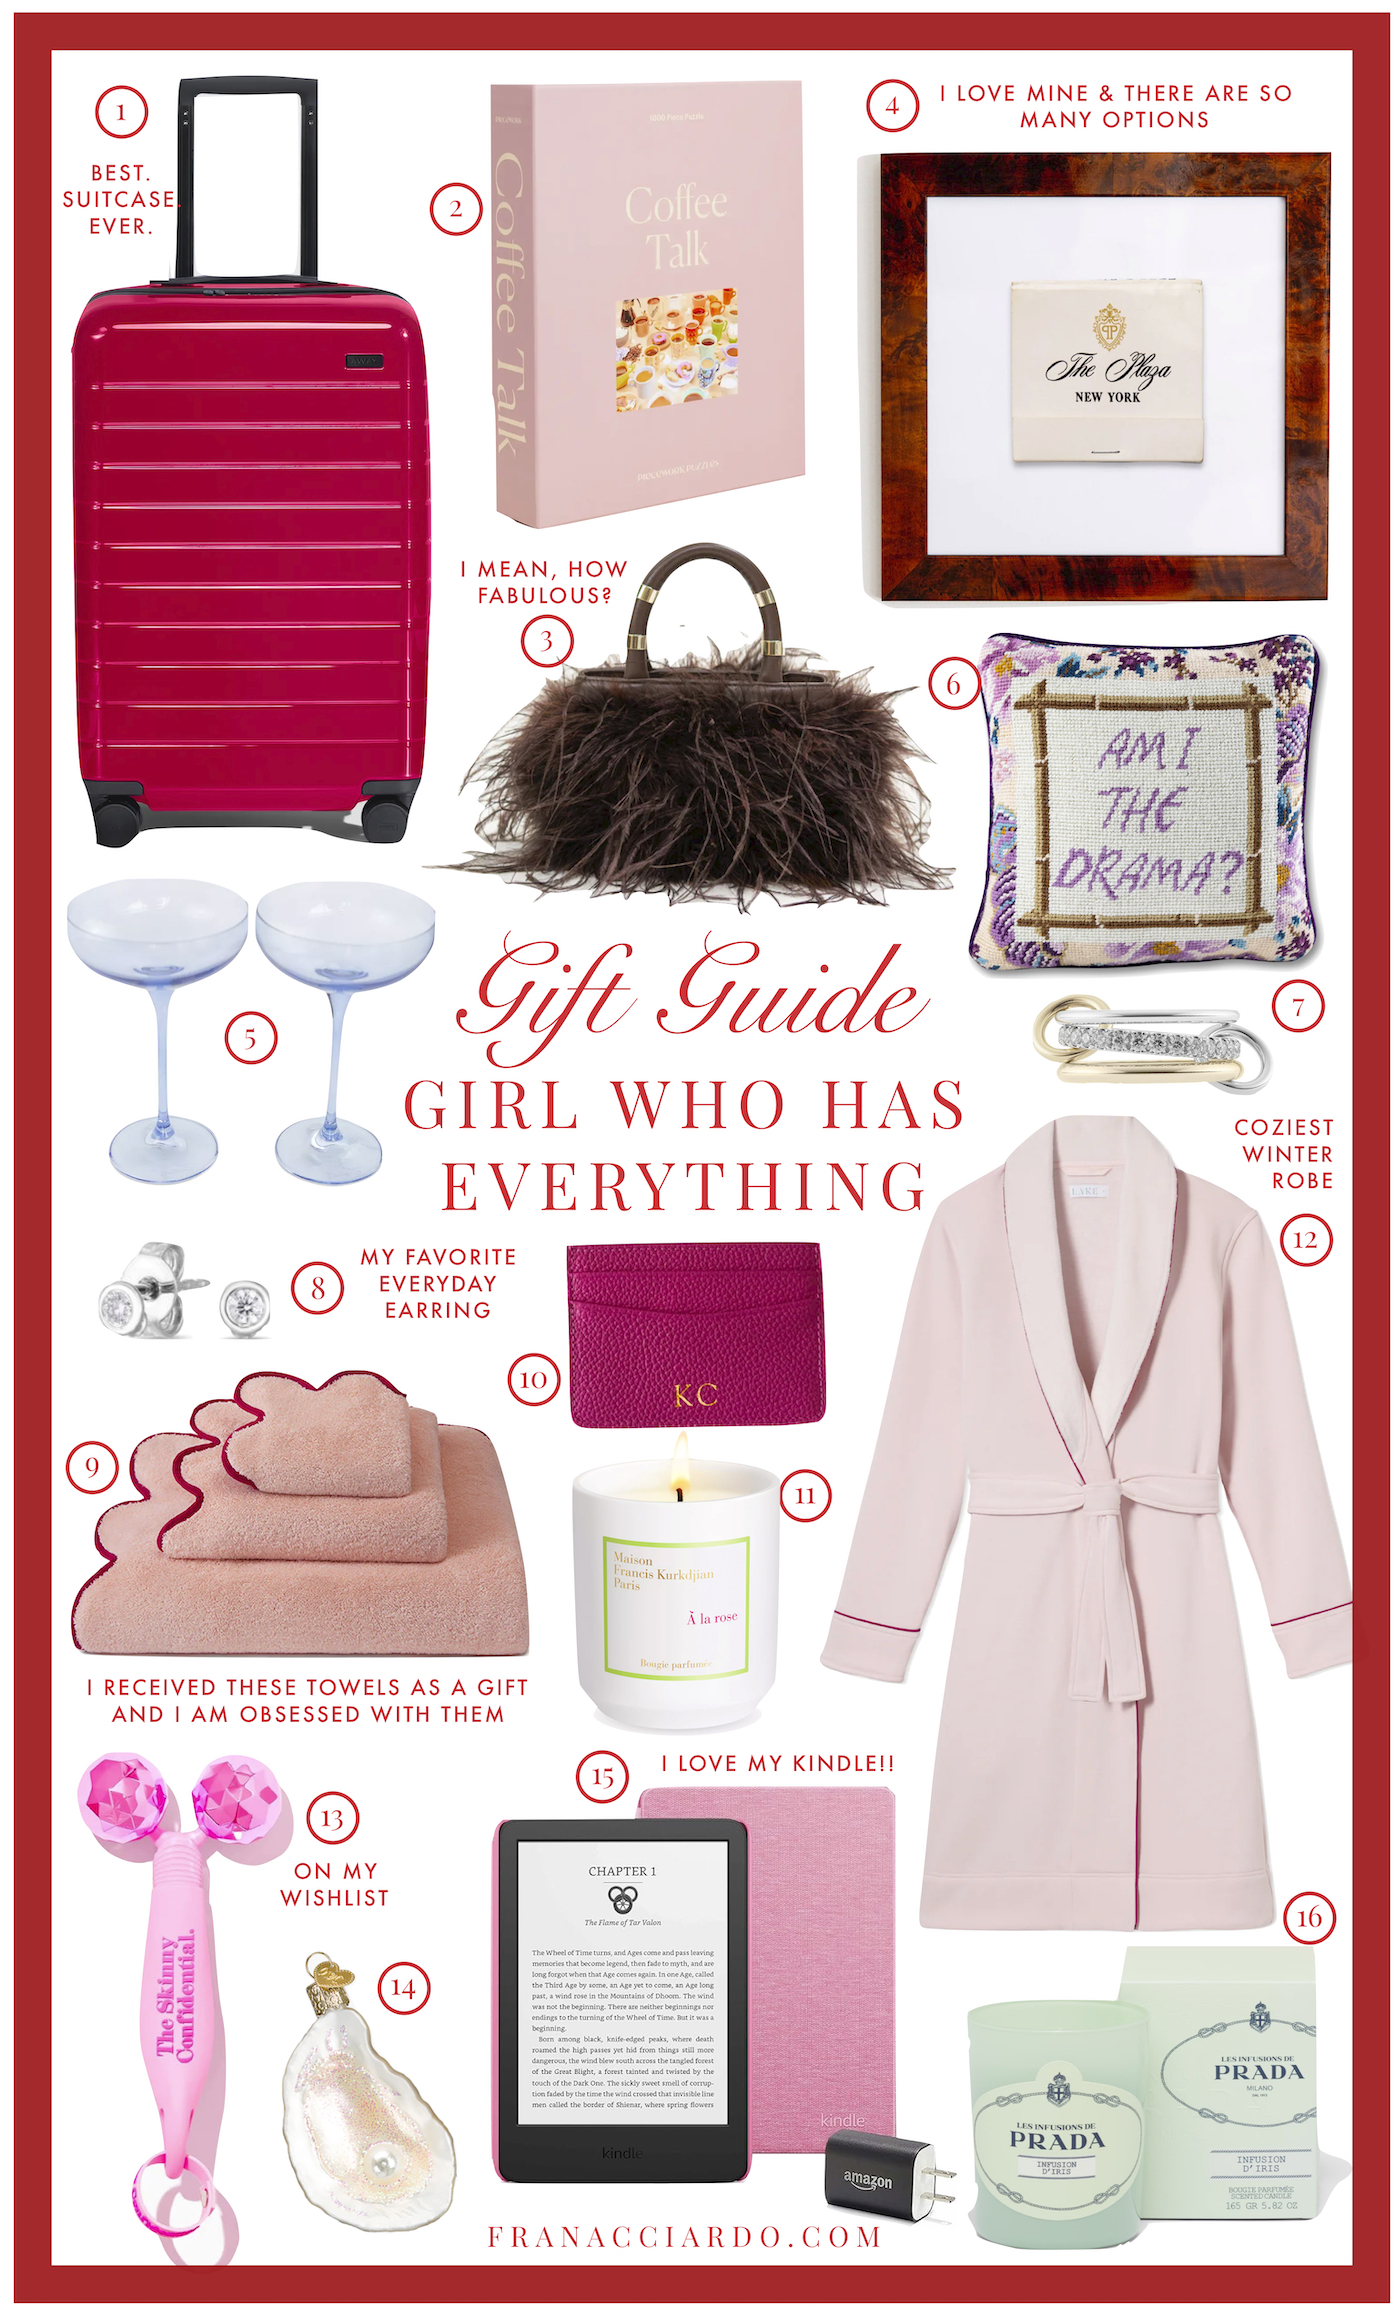 2023 Gift Guide: Girl Who Has Everything Fran Acciardo Luxury and Budget Holiday Gift Ideas